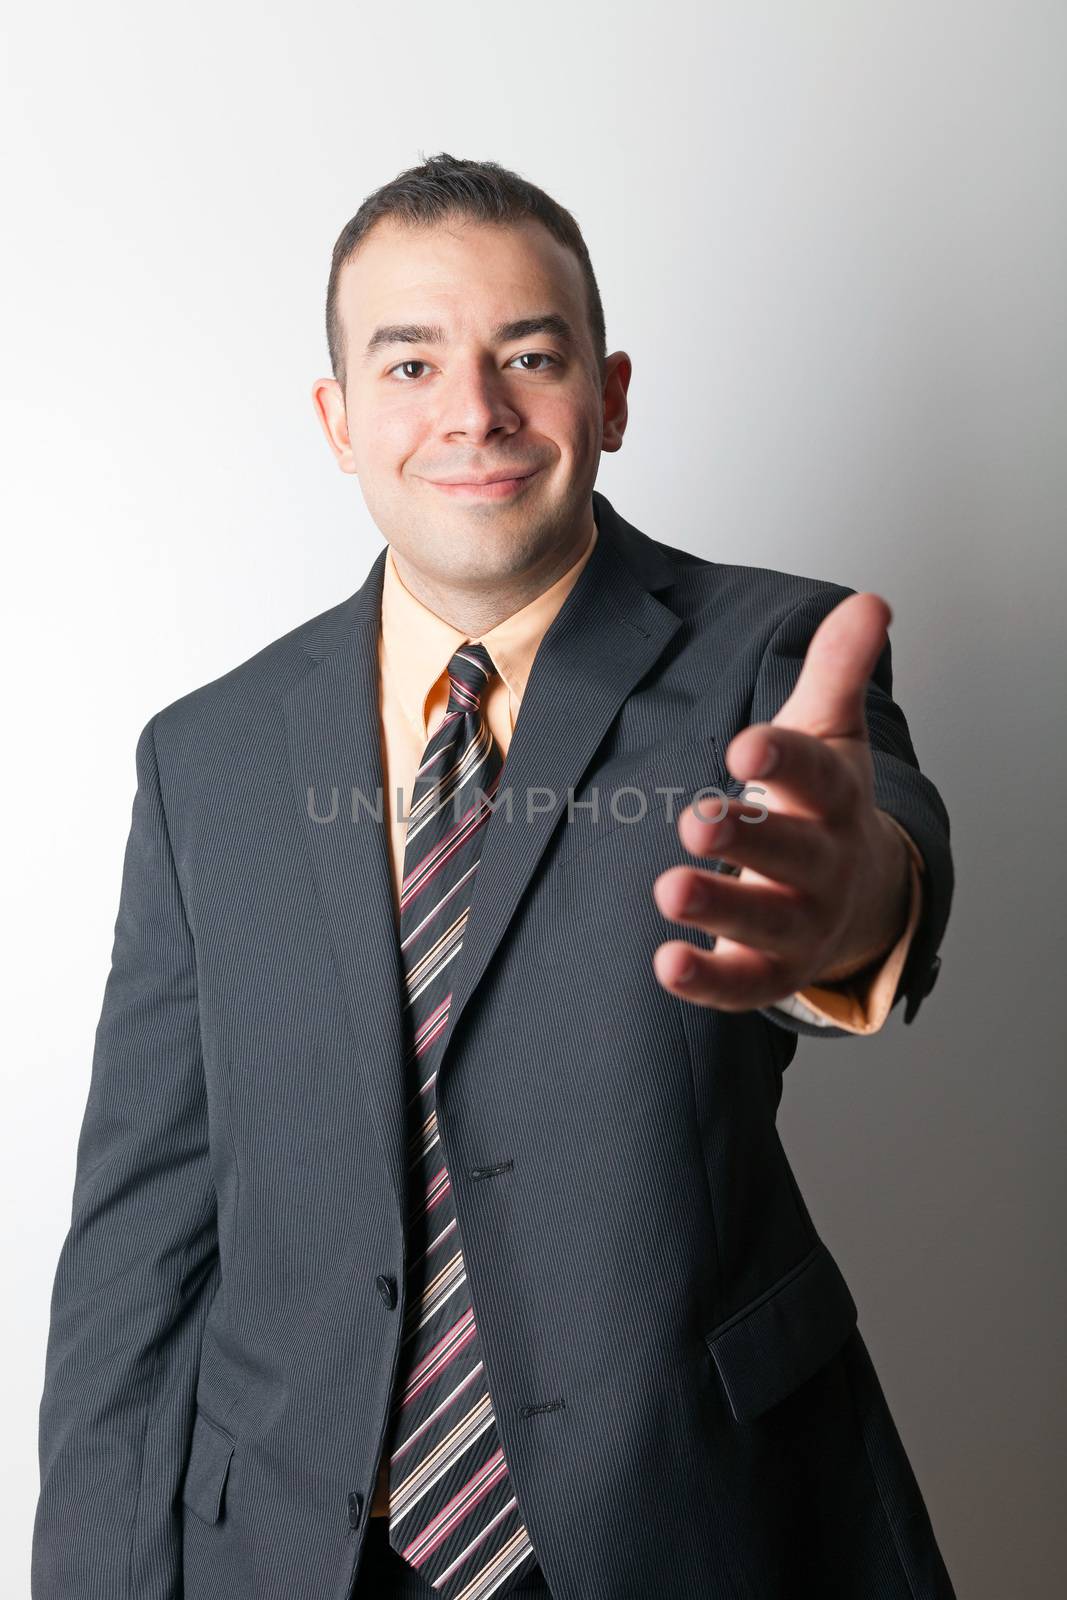 Friendly business man greeting the viewer and extending his hand out for a handshake.